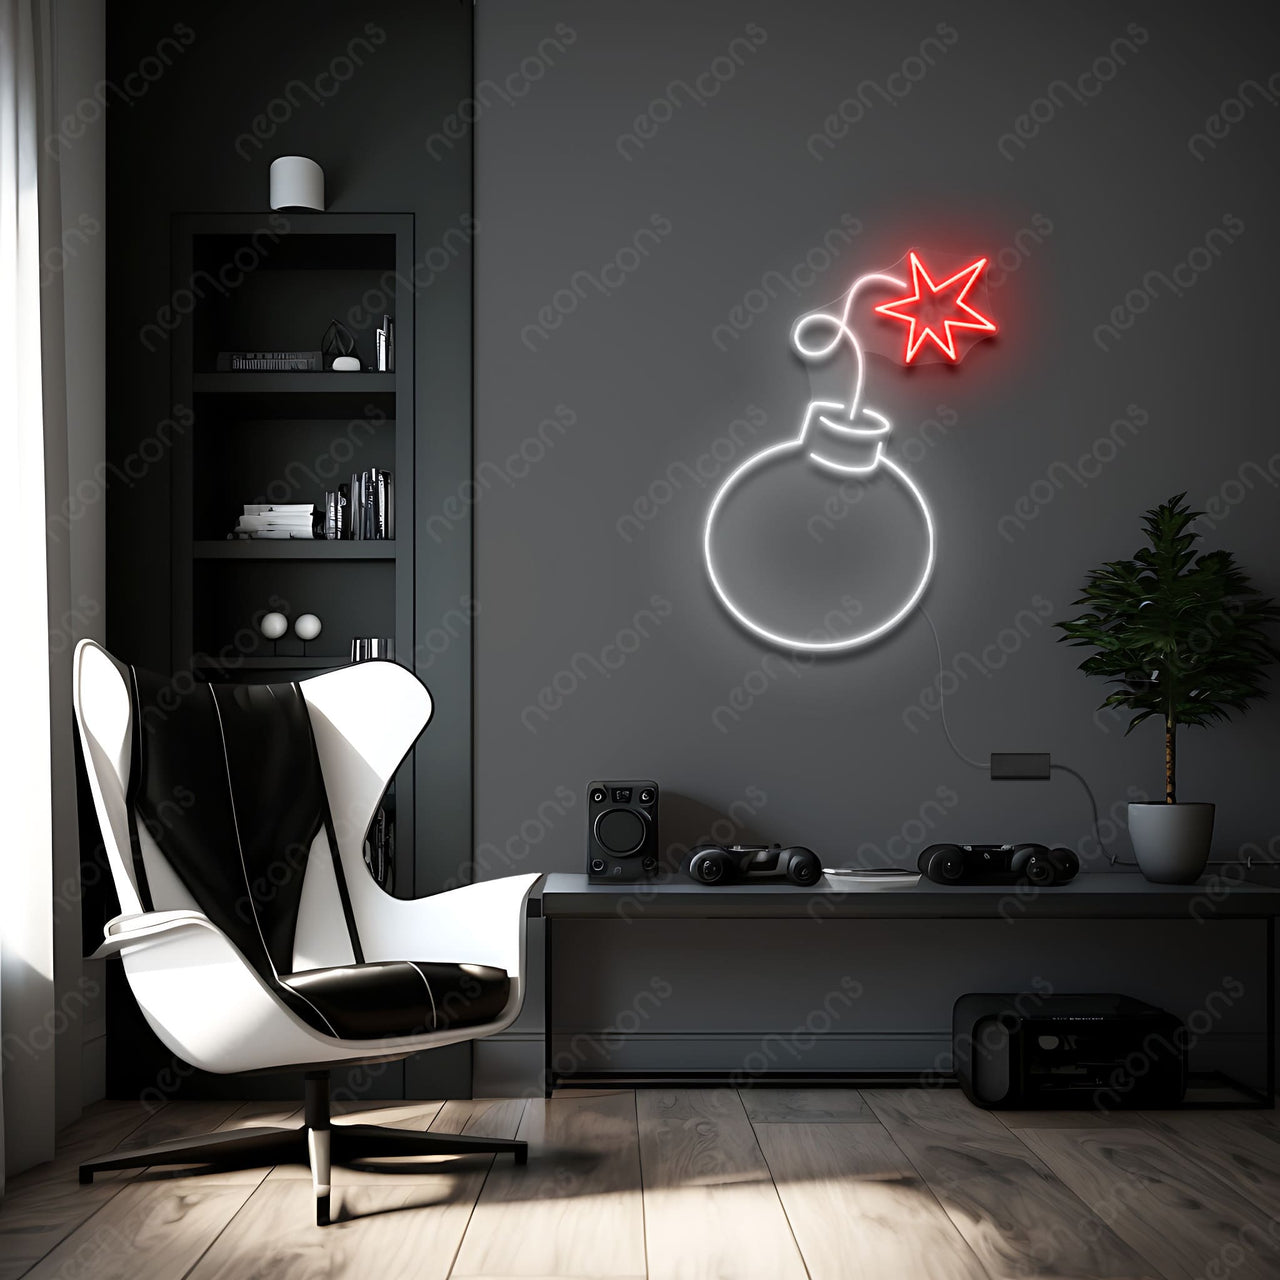 'Bombs Away' Neon Sign by Neon Icons